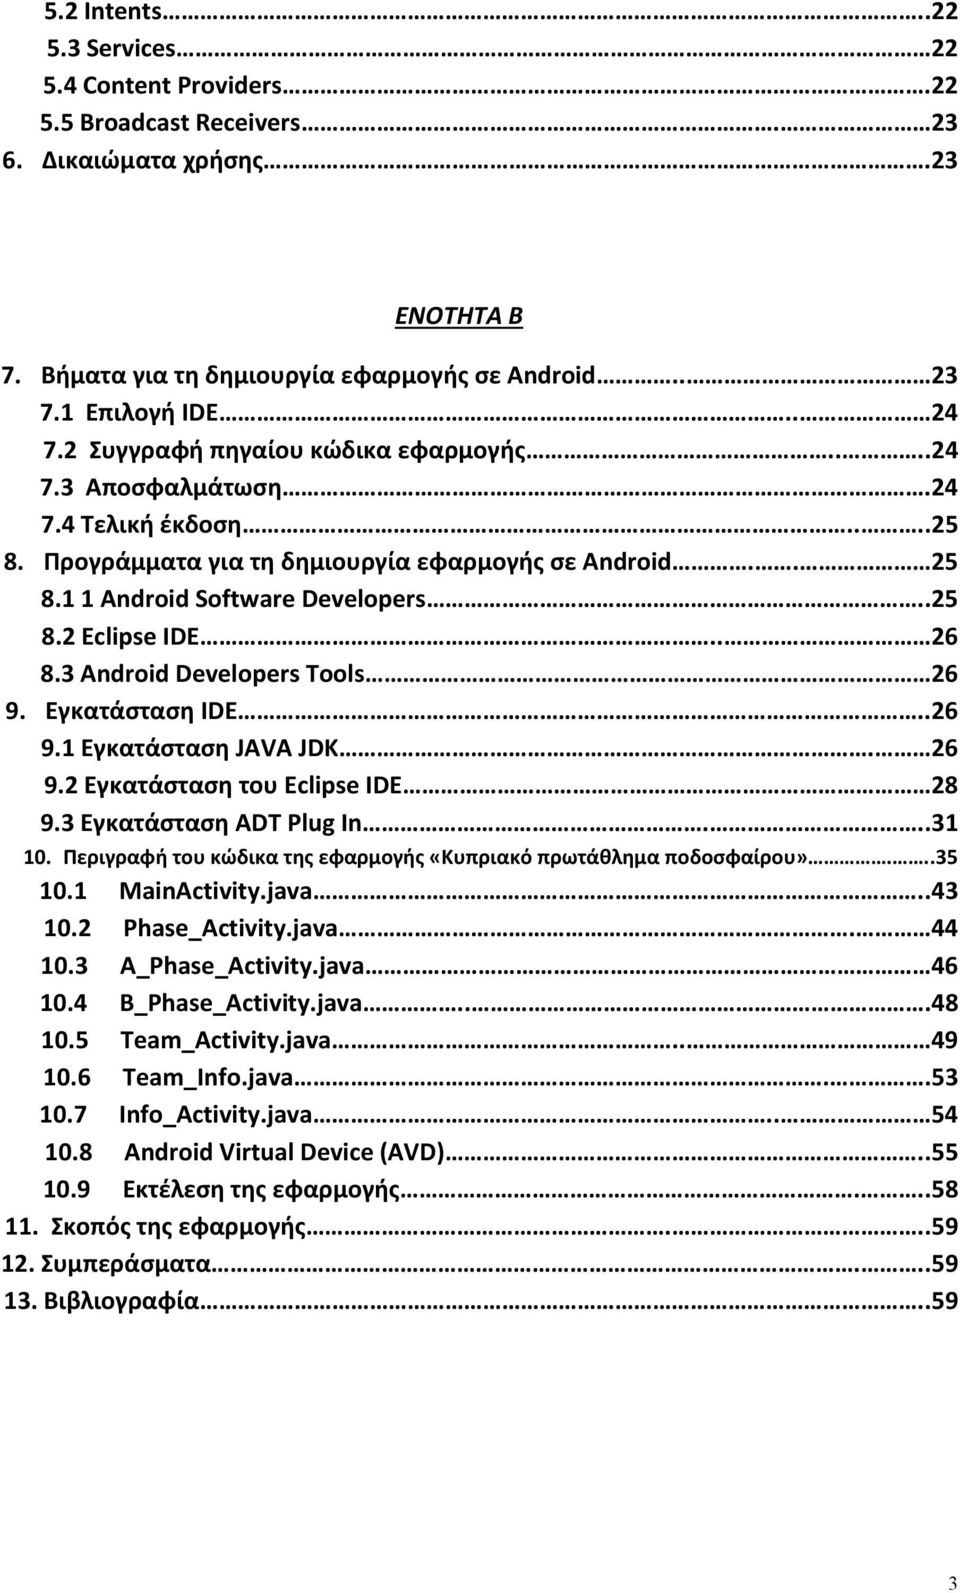 . 26 8.3 Android Developers Tools 26 9. Εγκατάσταση IDE..26 9.1 Εγκατάσταση JAVA JDK. 26 9.2 Εγκατάσταση του Eclipse IDE 28 9.3 Εγκατάσταση ADT Plug In...31 10.